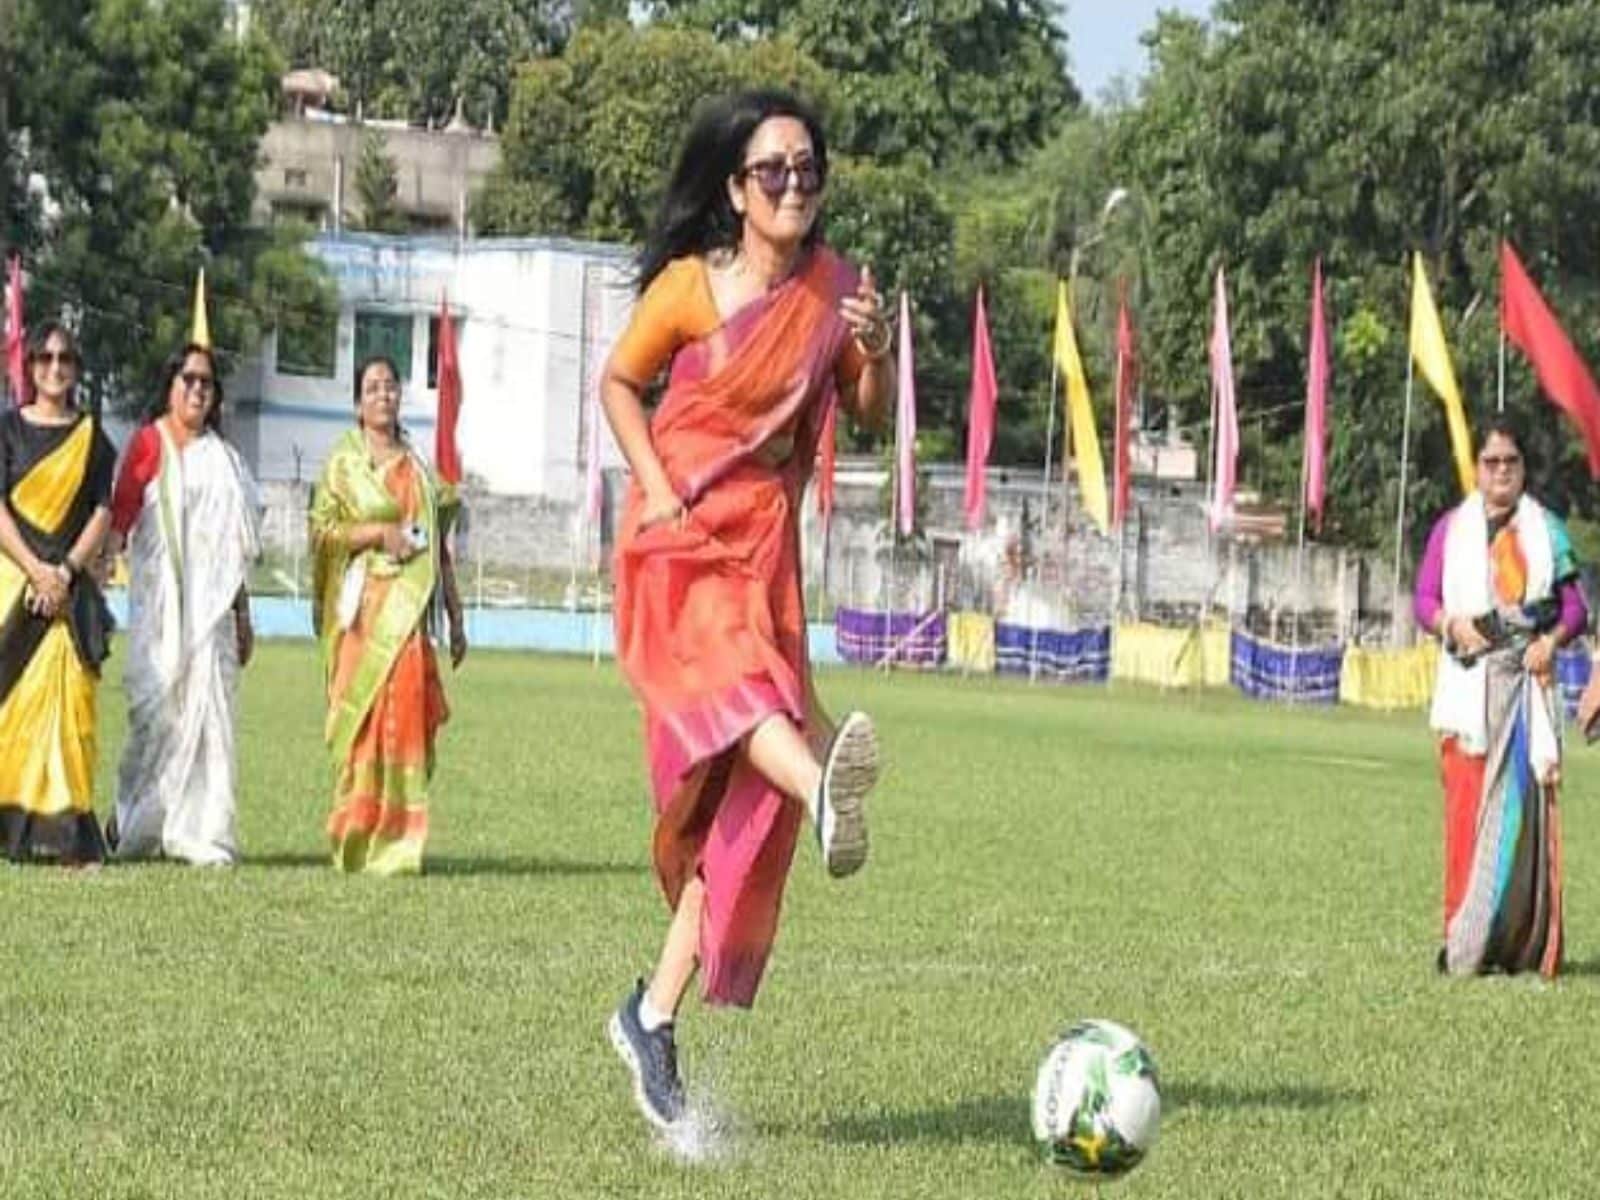 Mahua Moitra plays football in a saree with sports shoes & sunglasses